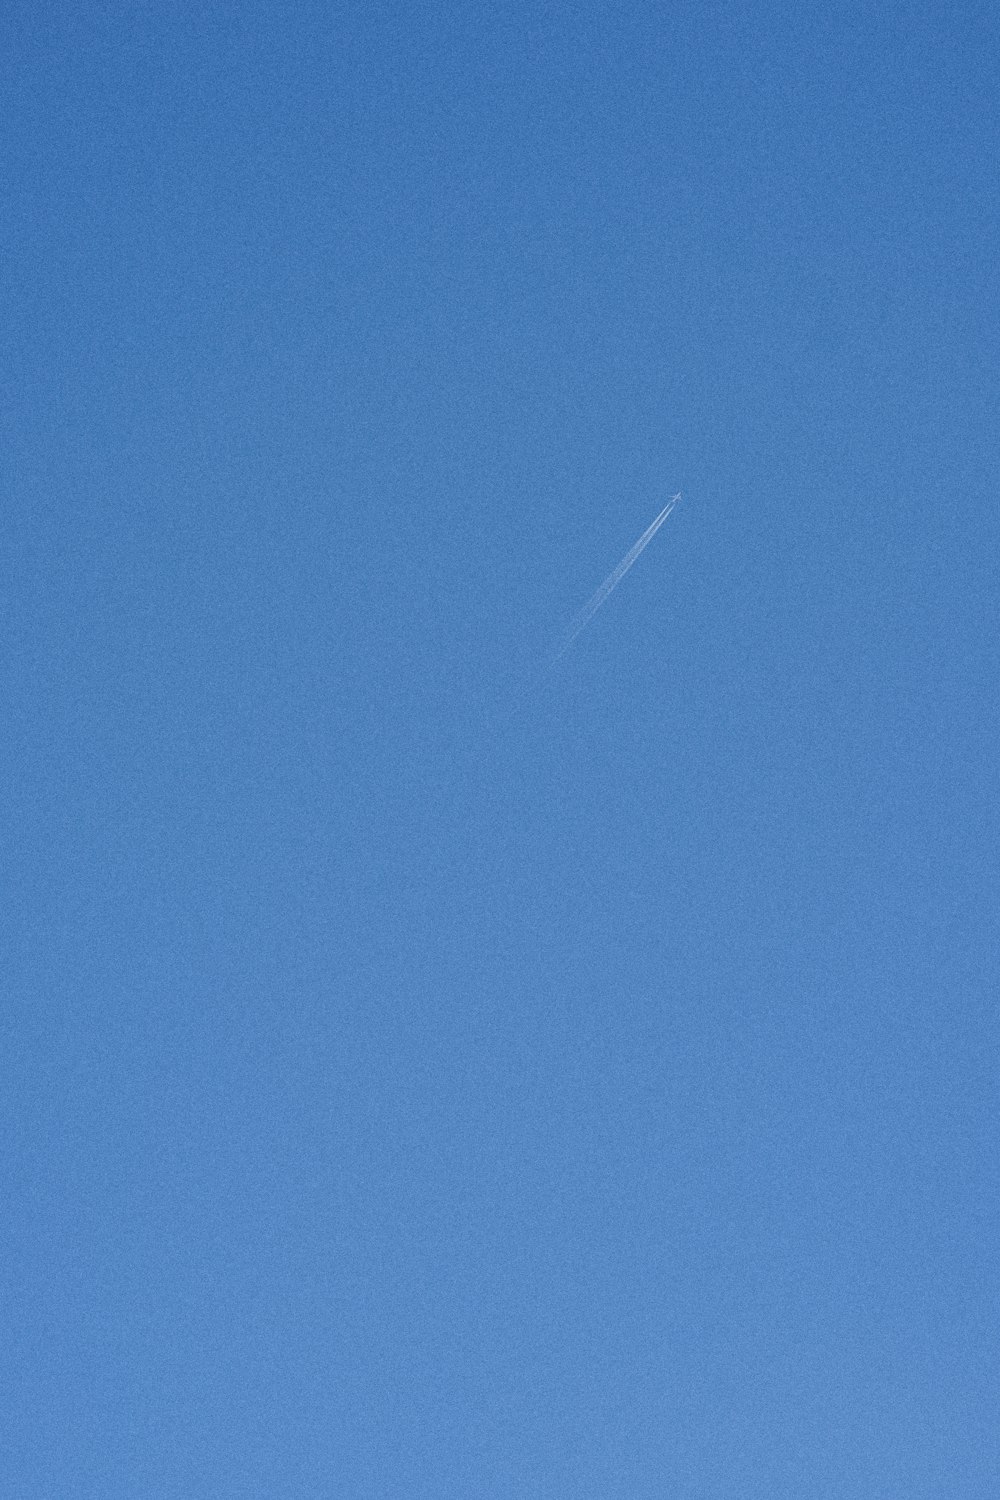 an airplane is flying in the blue sky